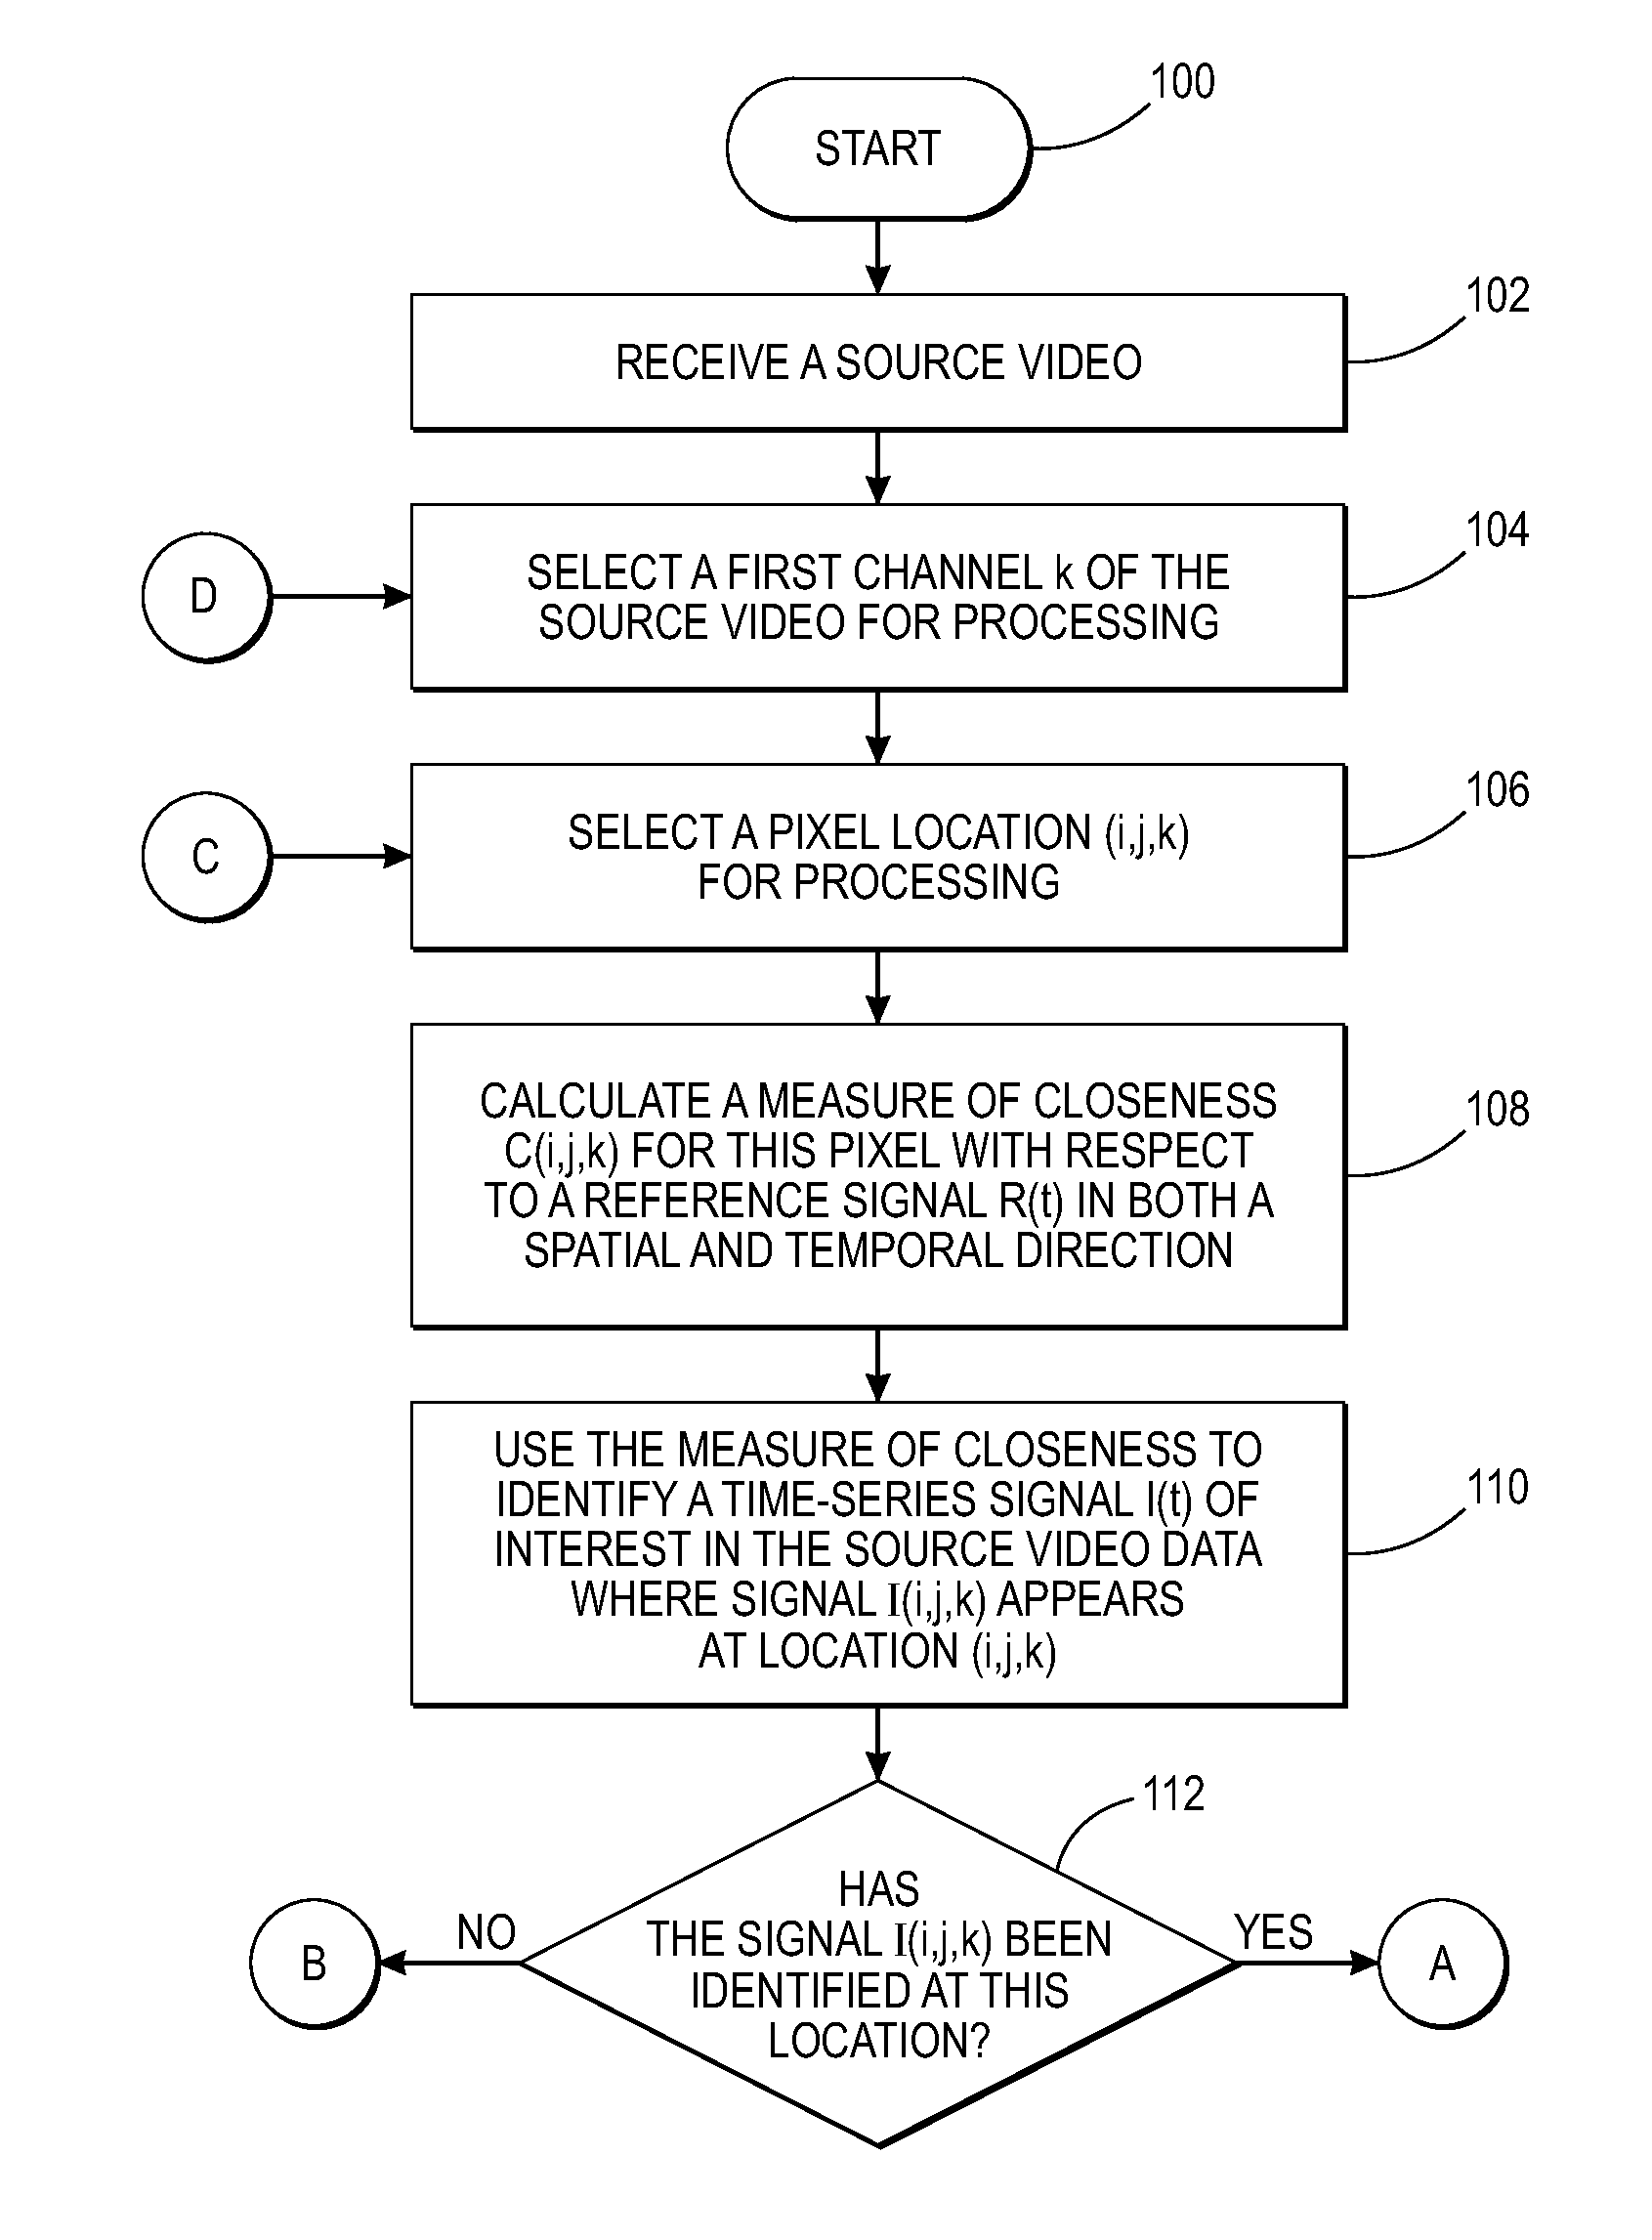 Processing source video for real-time enhancement of a signal of interest